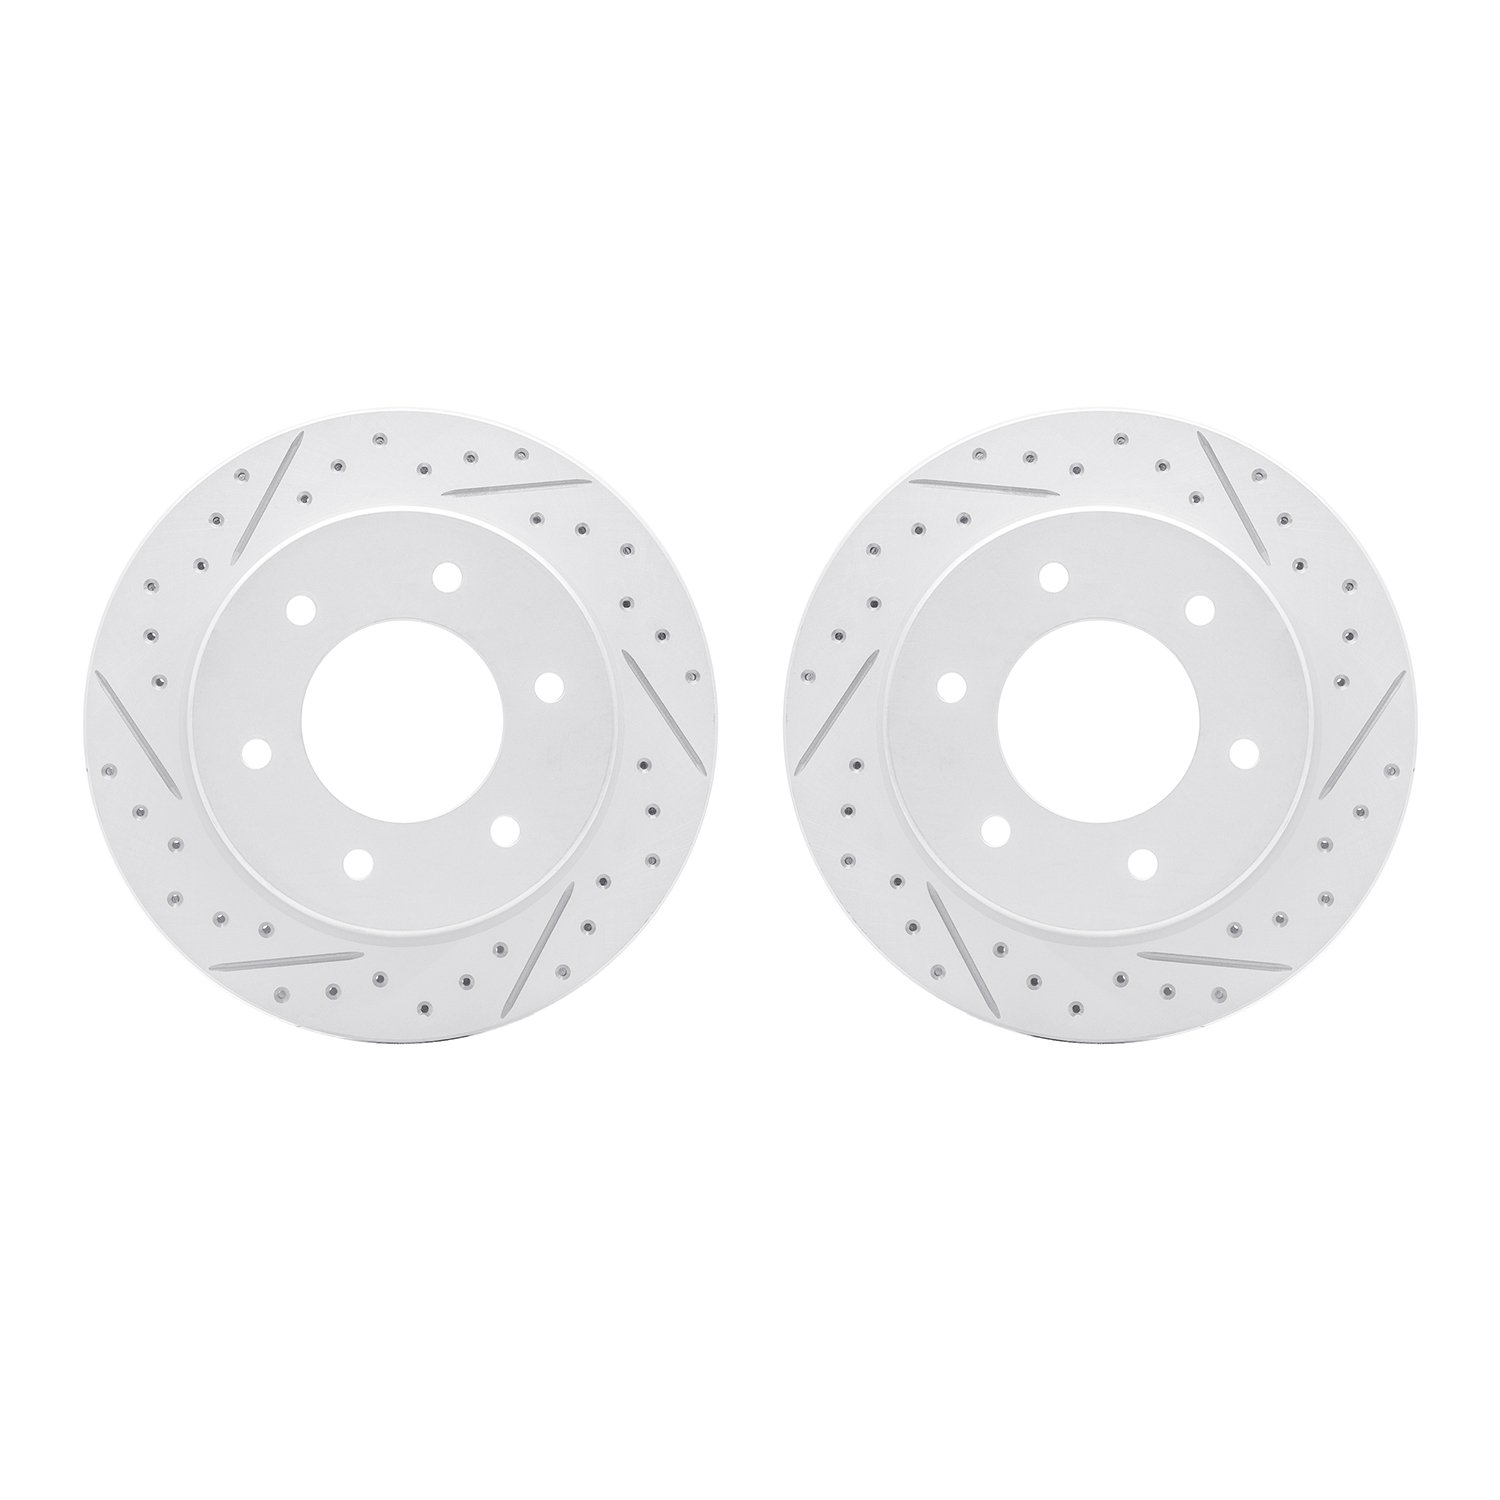 2002-54172 Geoperformance Drilled/Slotted Brake Rotors, Fits Select Ford/Lincoln/Mercury/Mazda, Position: Rear